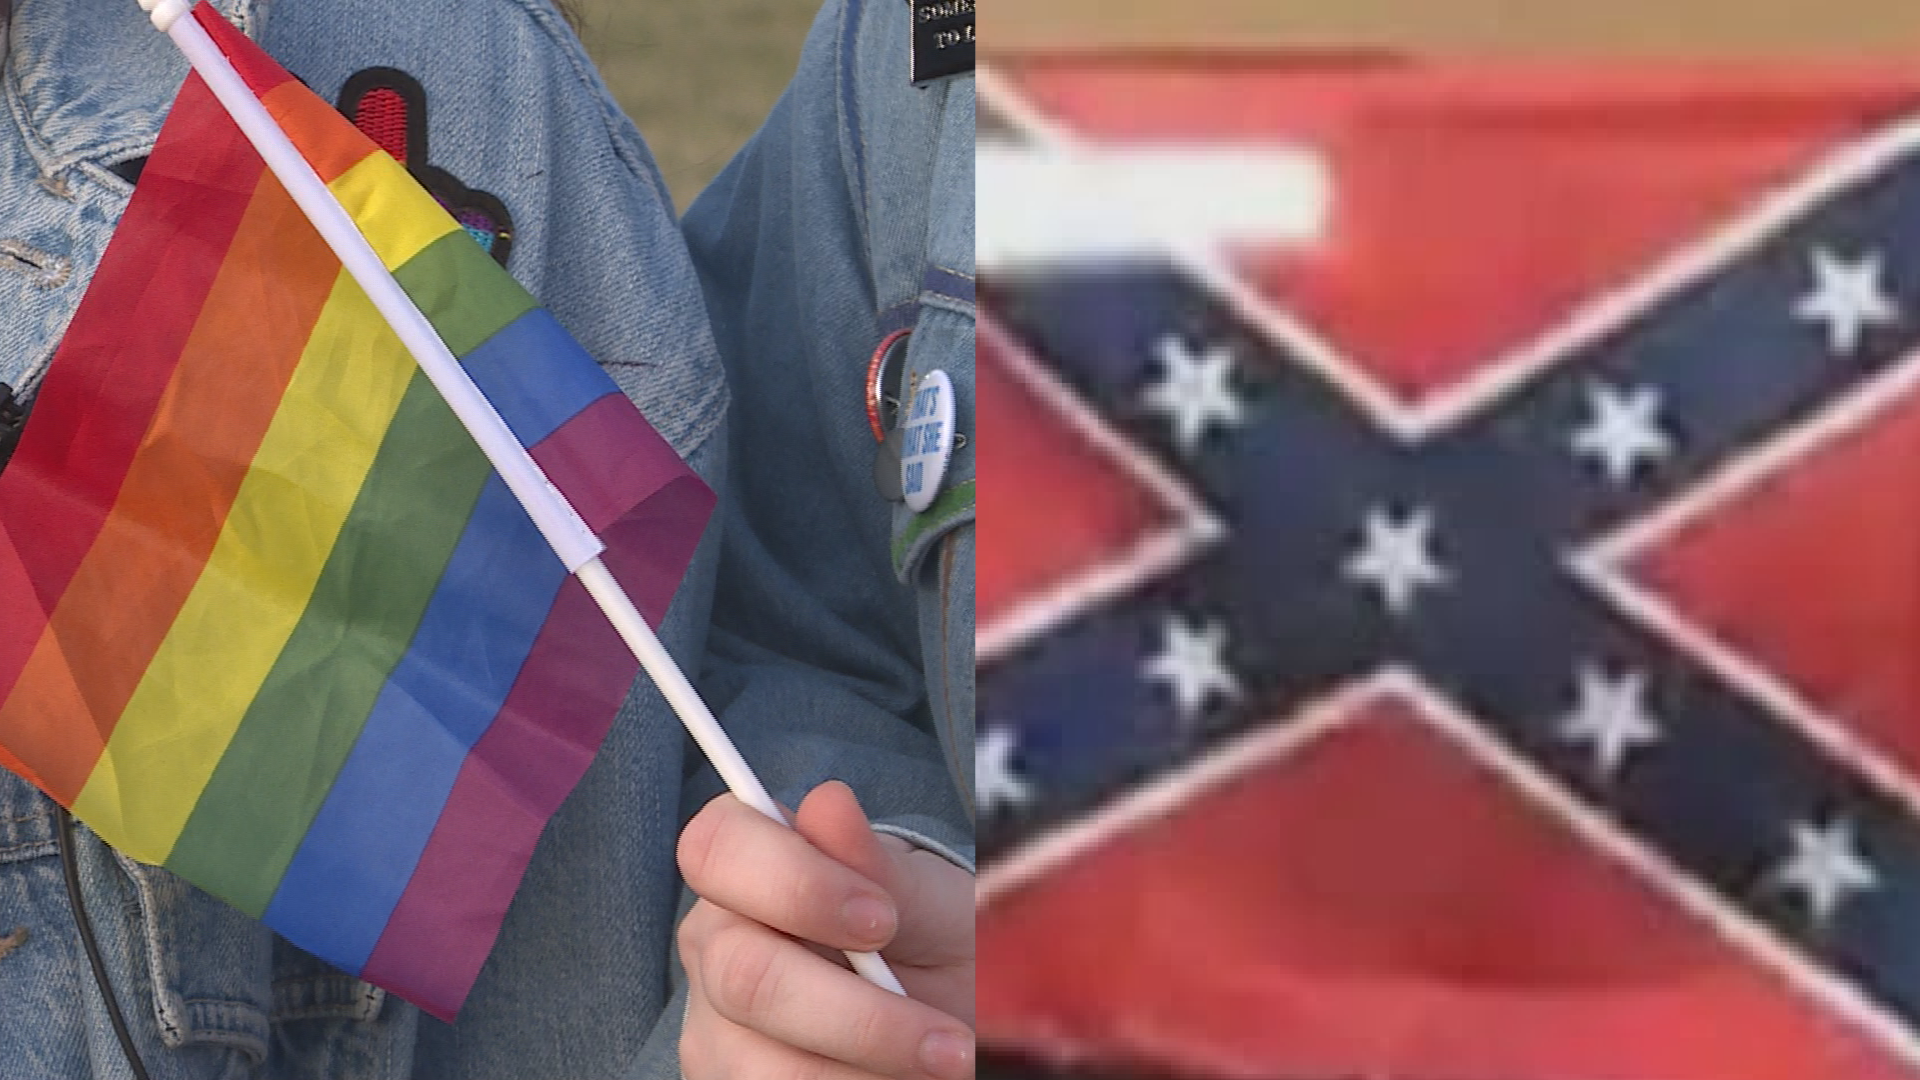 Confederate Flag Spotted in GeoGuesser Game Doesn't Narrow Down Anything